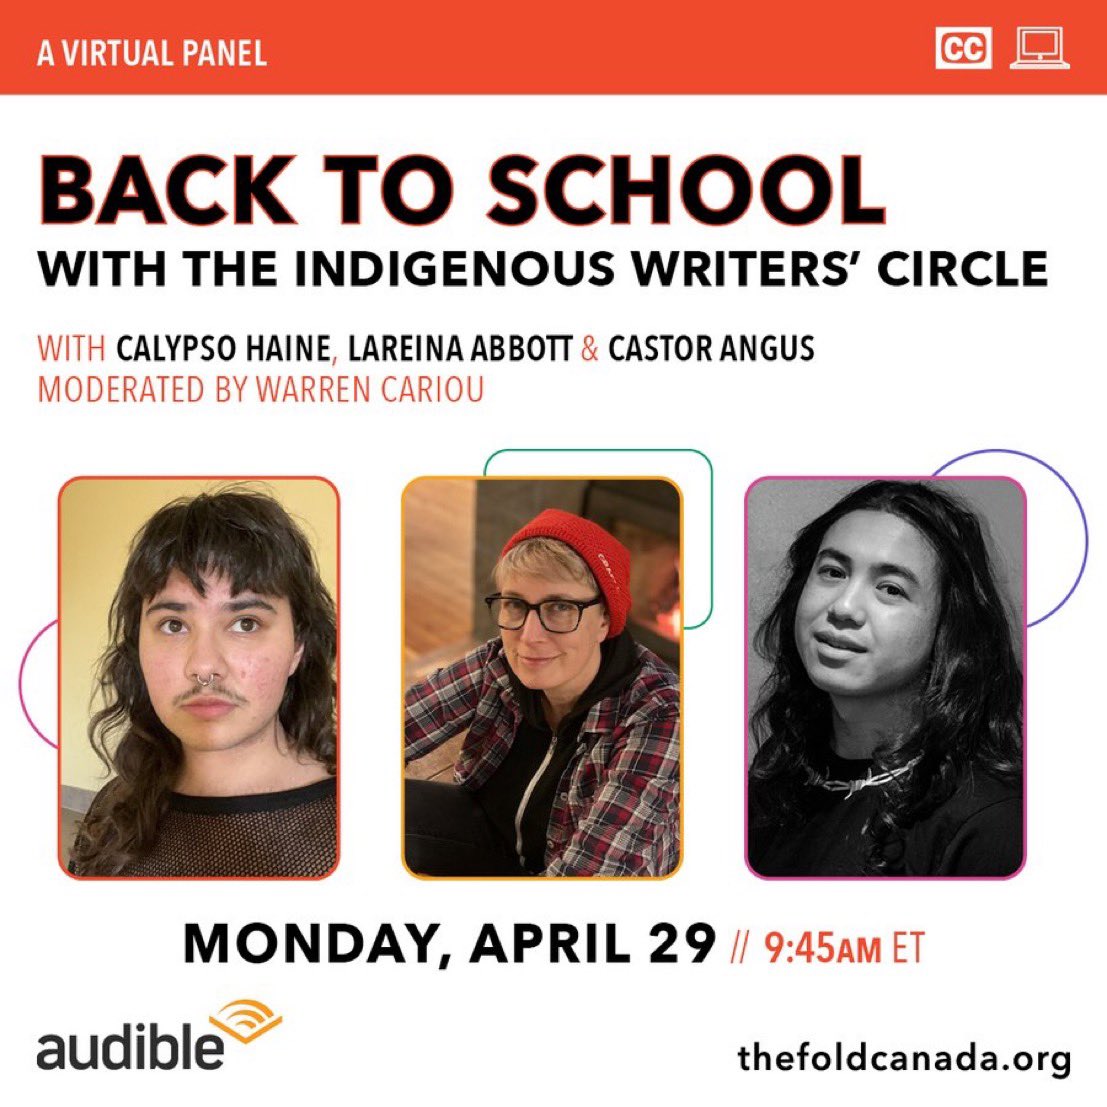 Starting off Day 2 with an @audible_ca sponsored event for #FOLD2024. Our Back to School panel, featuring Indigenous writers Calypso Haine, Lareina Abbott and Castor Angus begins in 15 minutes. Log on to watch now! fold2024.vfairs.com